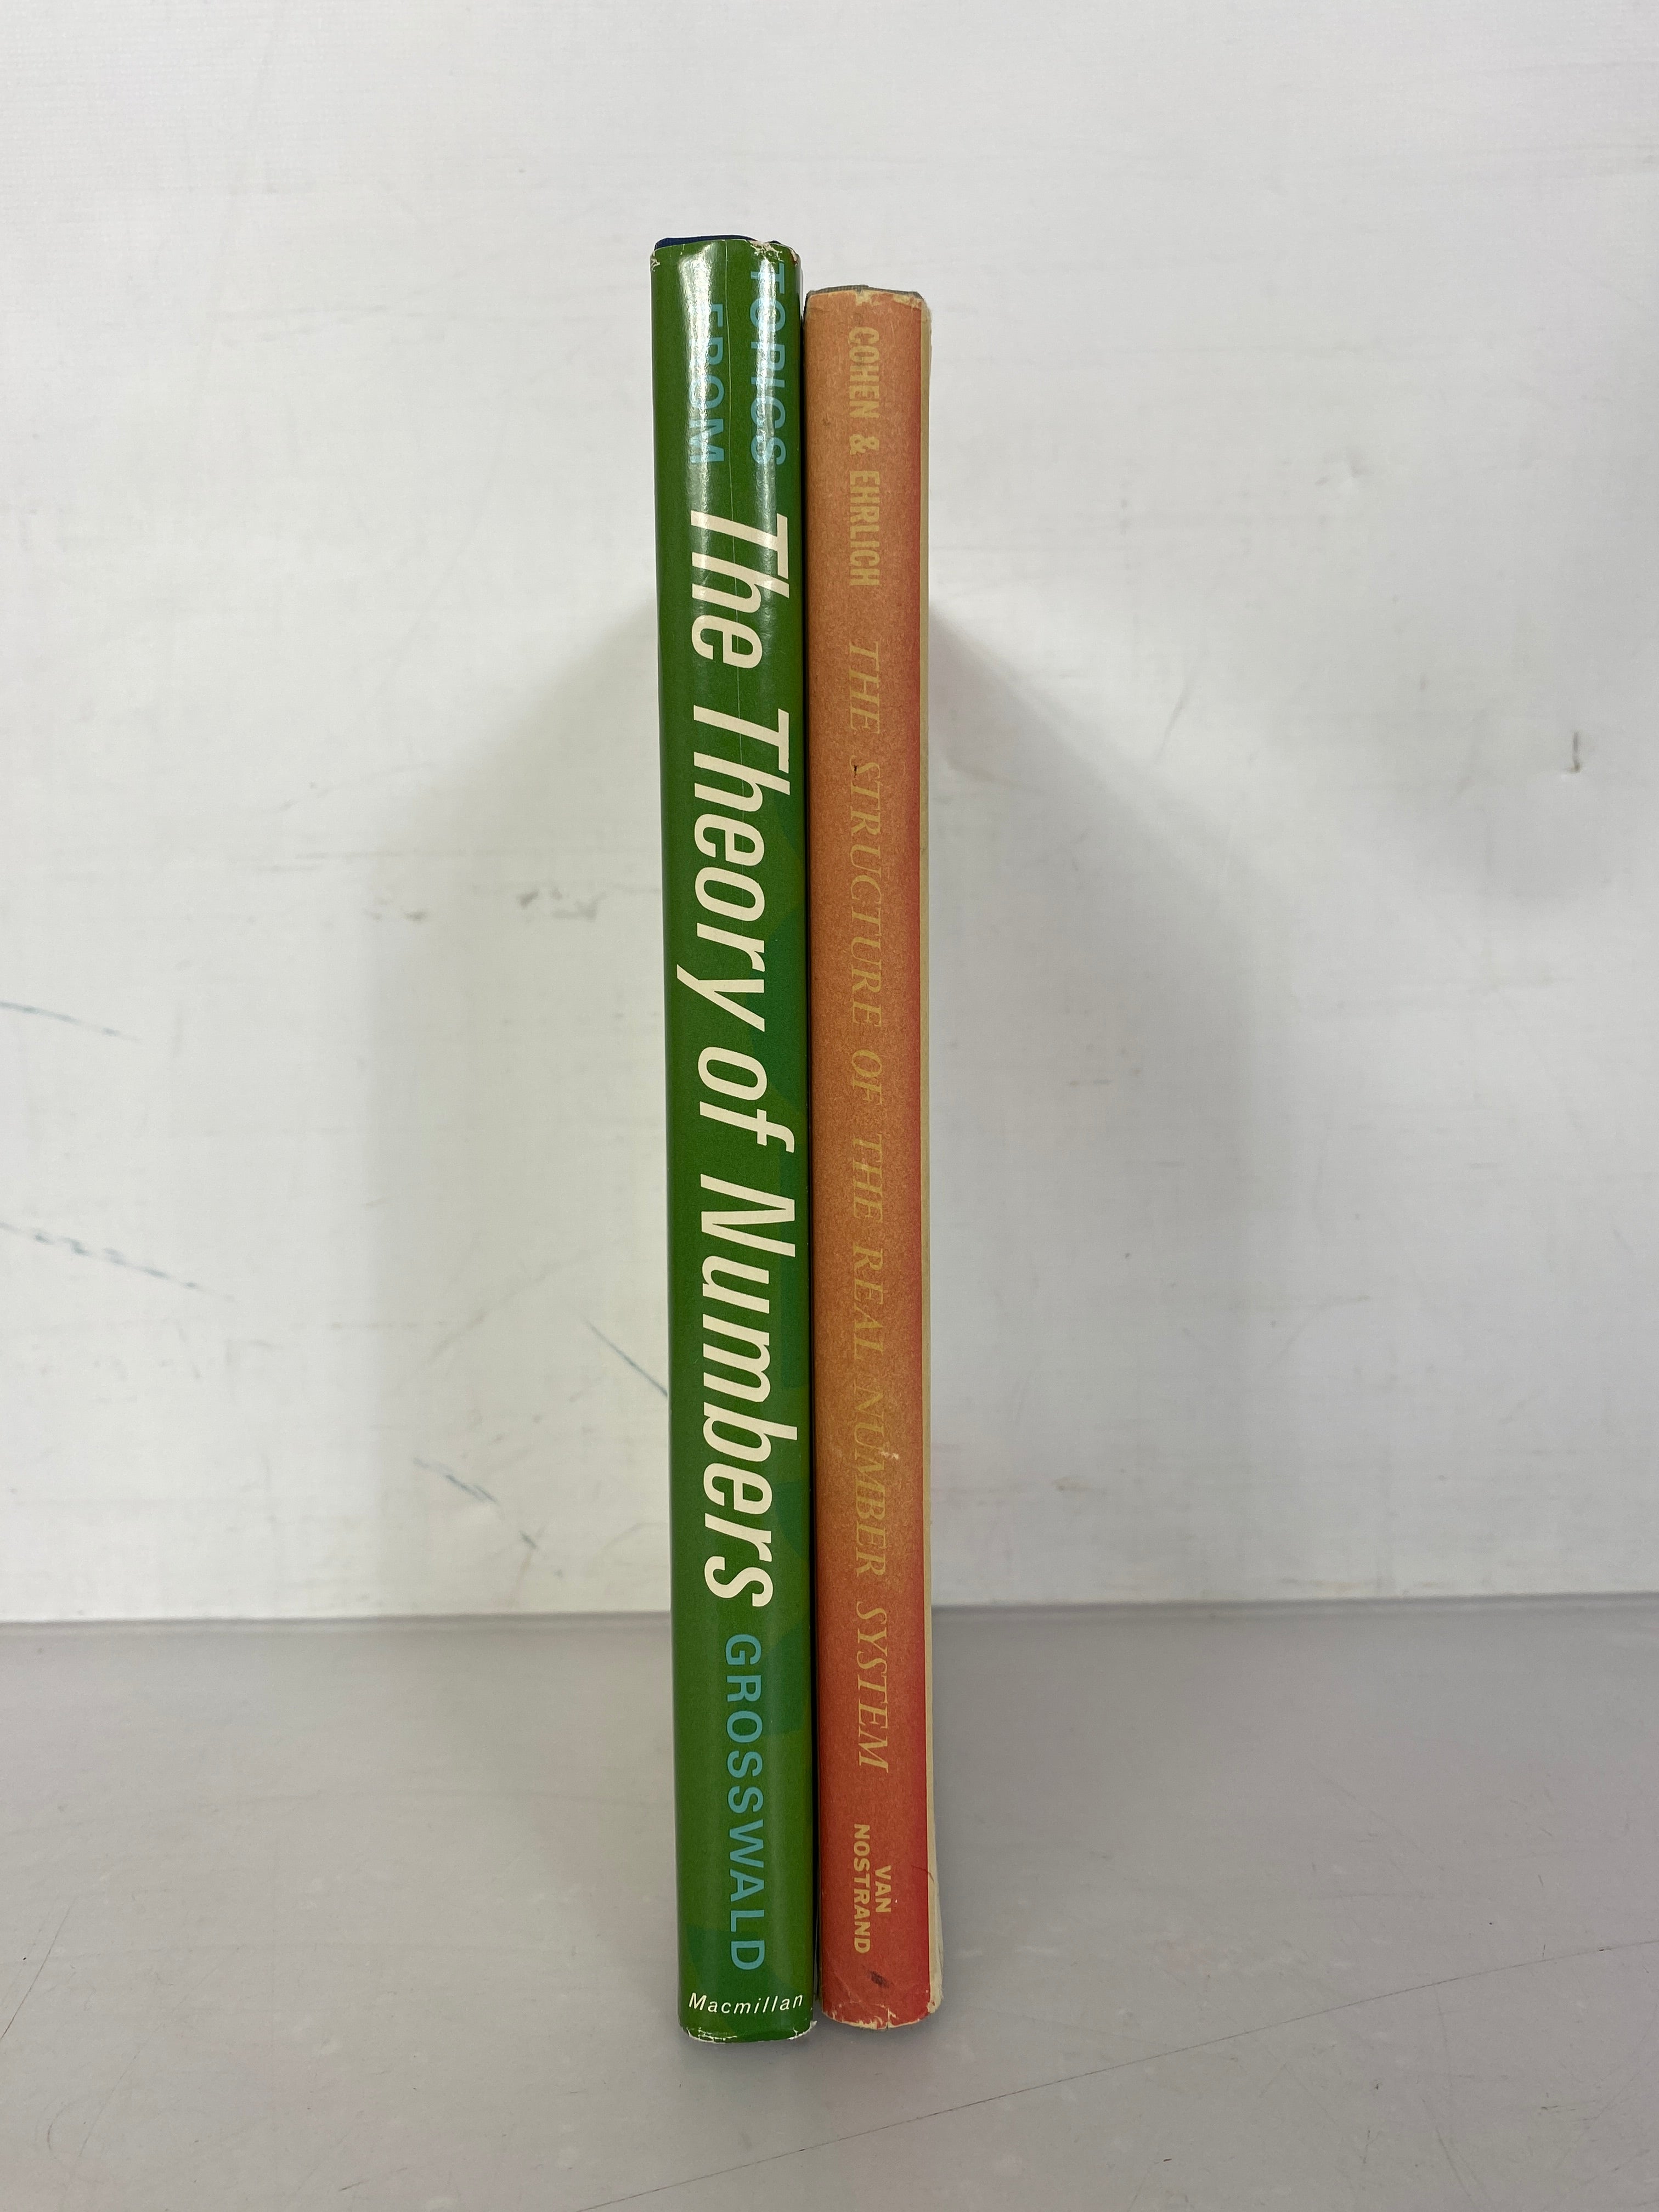 Lot of 2 Number Theory Books 1963-1966 HC DJ